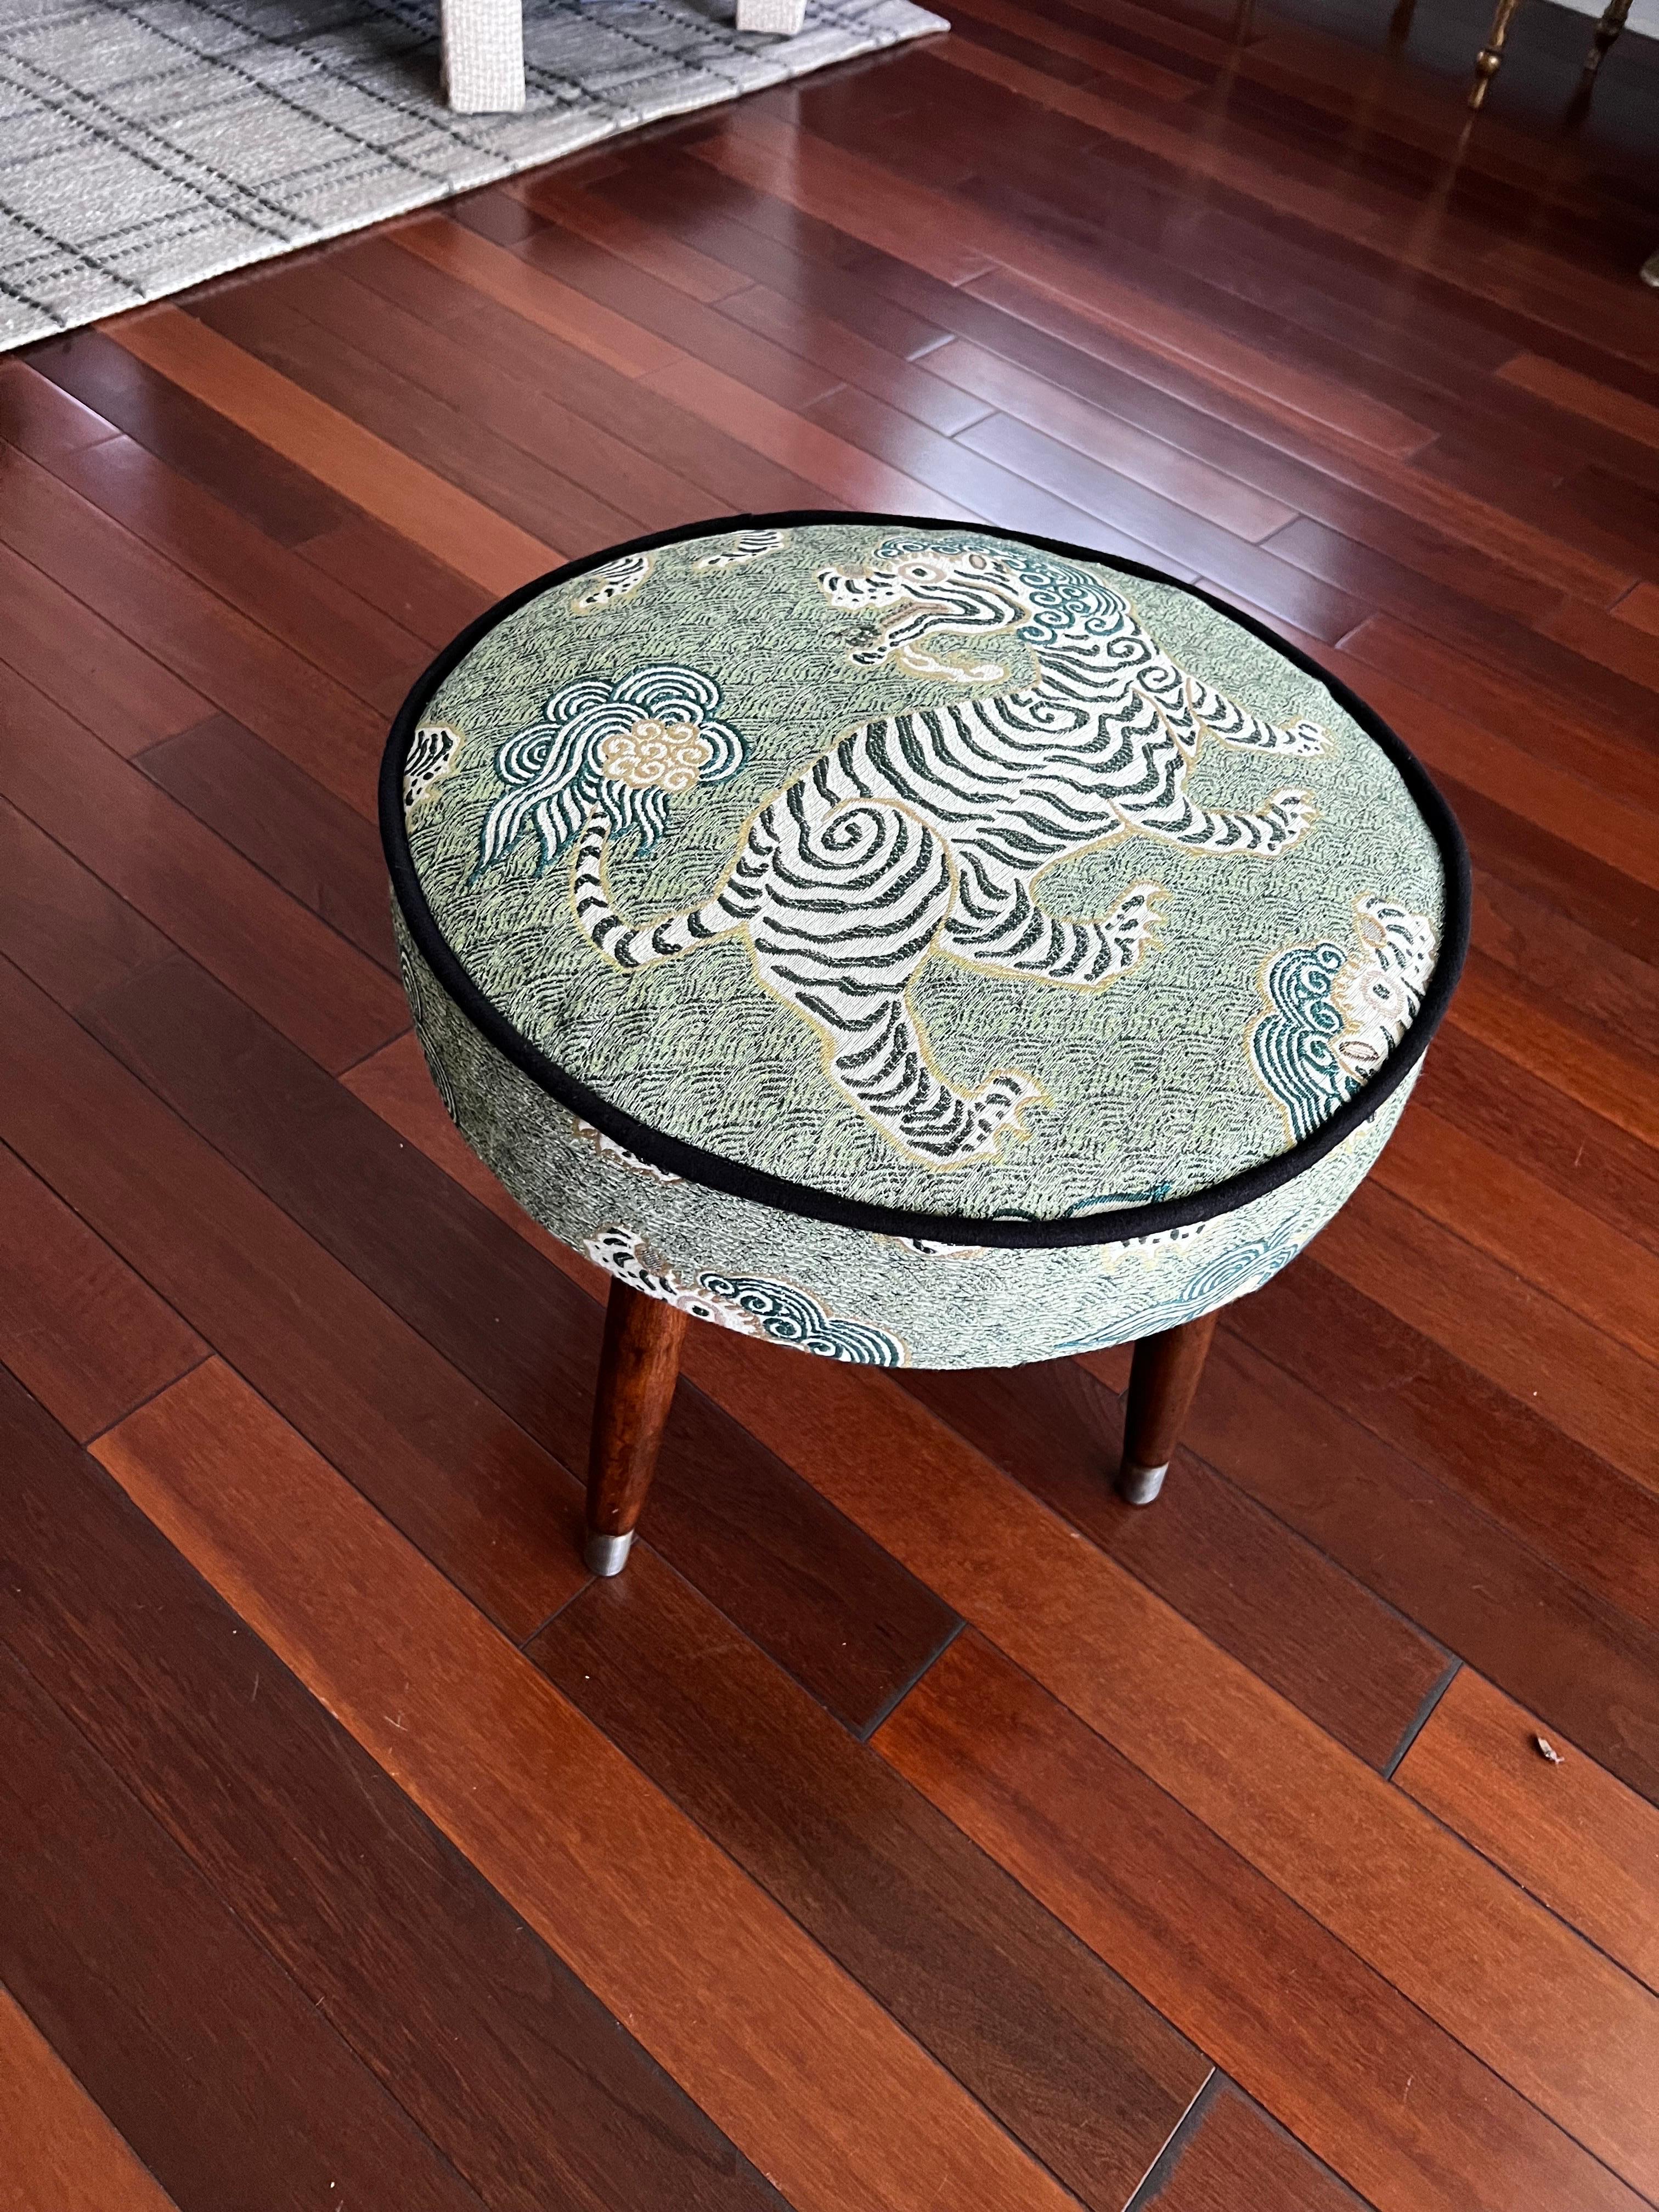 Stunning pair of vintage mid-century stools that have been refinished and reupholstered with a gorgeous Tibet fabric in Green color, black welting gives the perfect contrast and makes this pair so perfect !